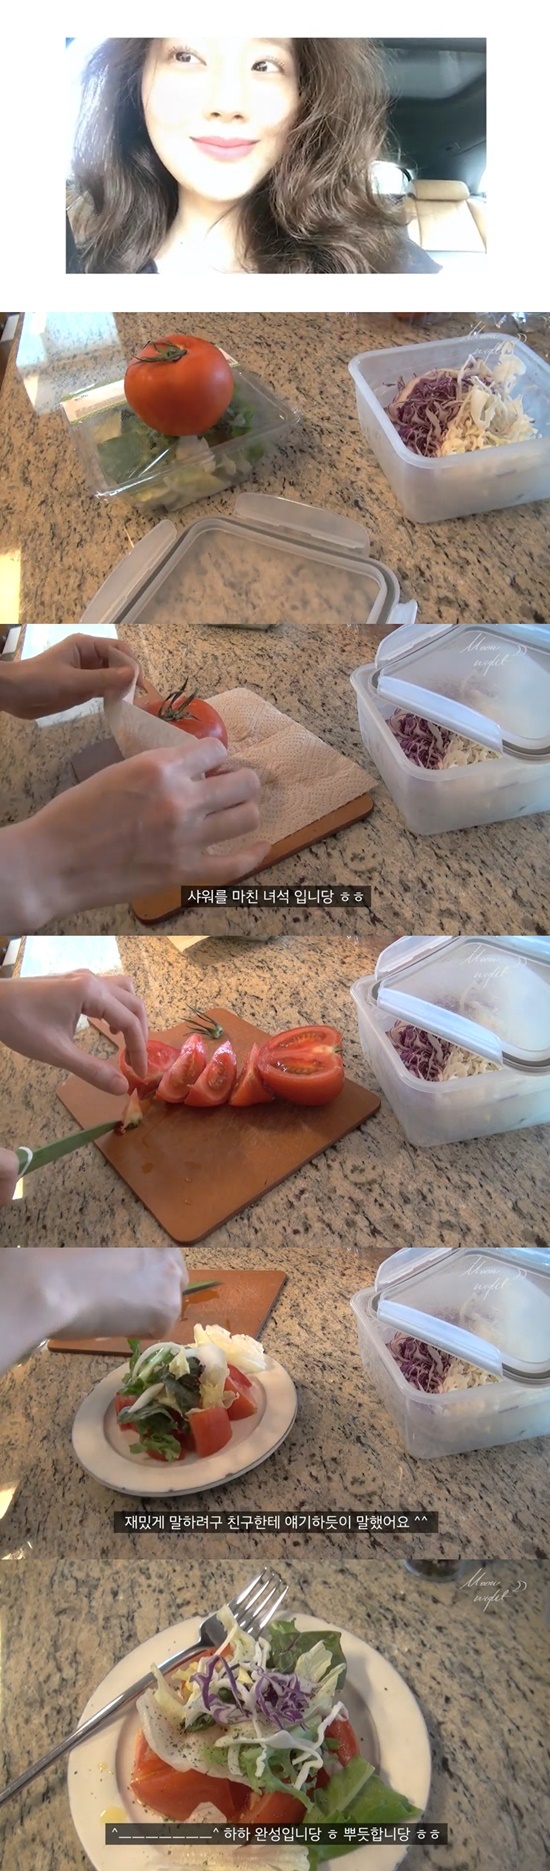 On the 30th, Namoo Actors YouTube posted a video titled Moon Chae-won ordinary daily V log. I tried Arepa today,In the public footage, Moon Chae-won cooked the tomato Salad himself; he skillfully did from ingredients to grooming, and Salad completed.In particular, Moon Chae-won tried to communicate positively with viewers in the middle of the video by explaining how to make Salad.Meanwhile, Moon Chae-won is reviewing his next work after finishing TVN Kyeryong Sunnyeojeon last year.